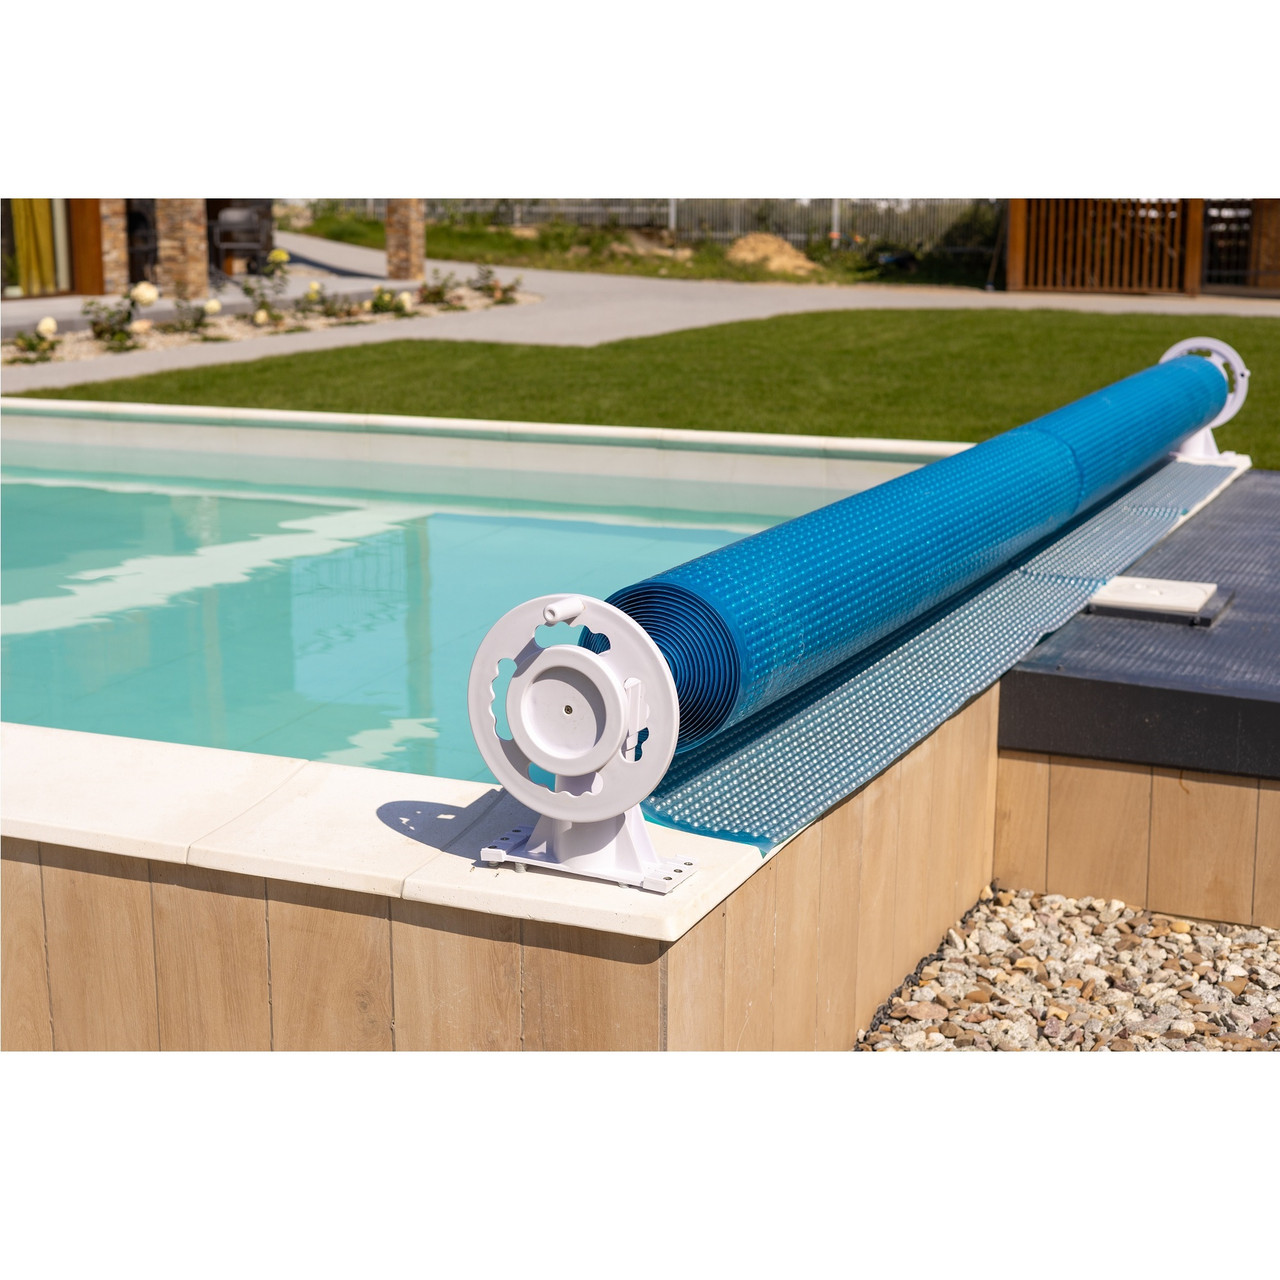 20' Swimming Pool Ground Cover Reel with Adjustable Tube